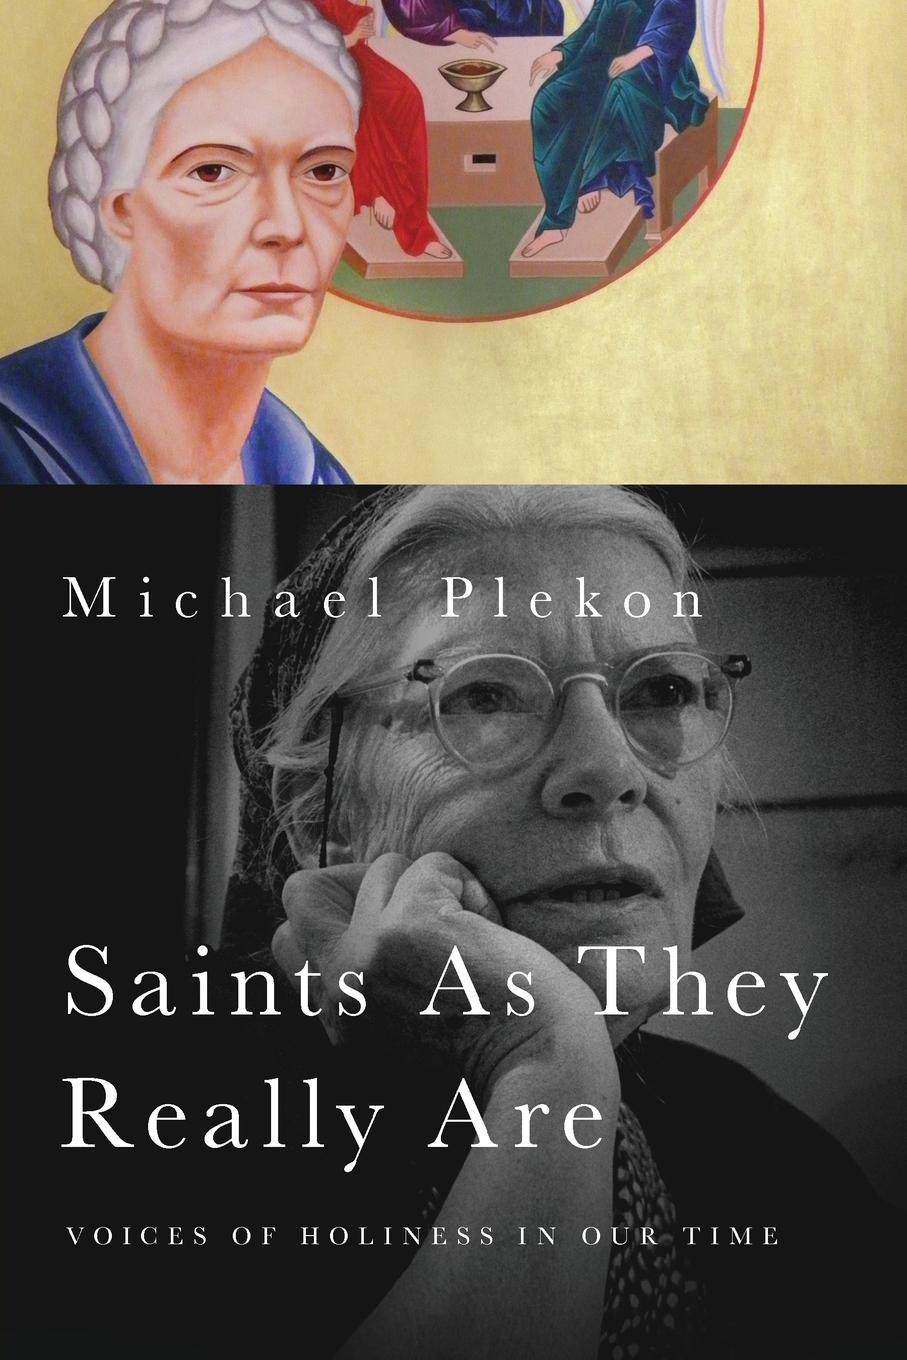 Saints As They Really Are. Voices of Holiness in Our Time